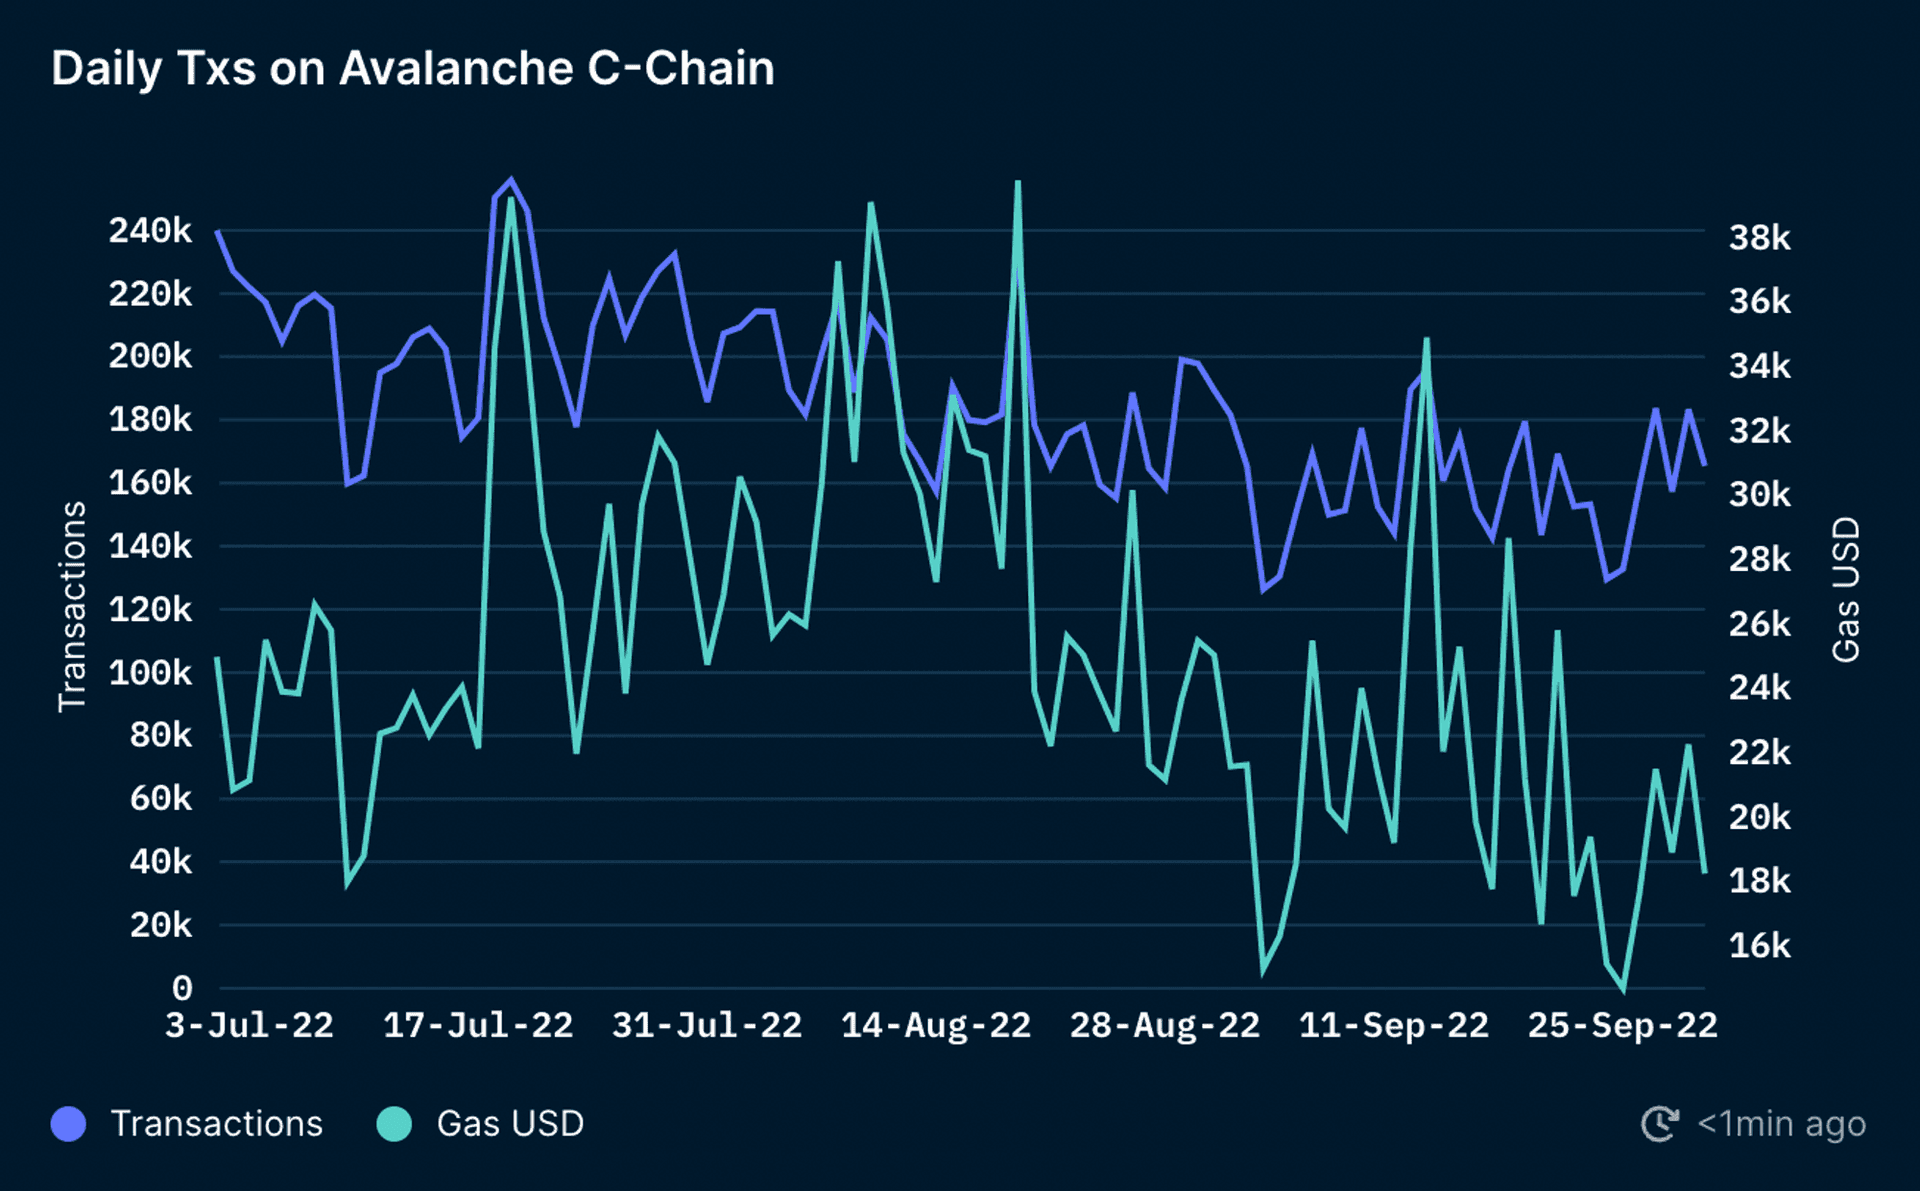 Daily Transactions and Average Daily Gas Paid on Avalanche C-Chain